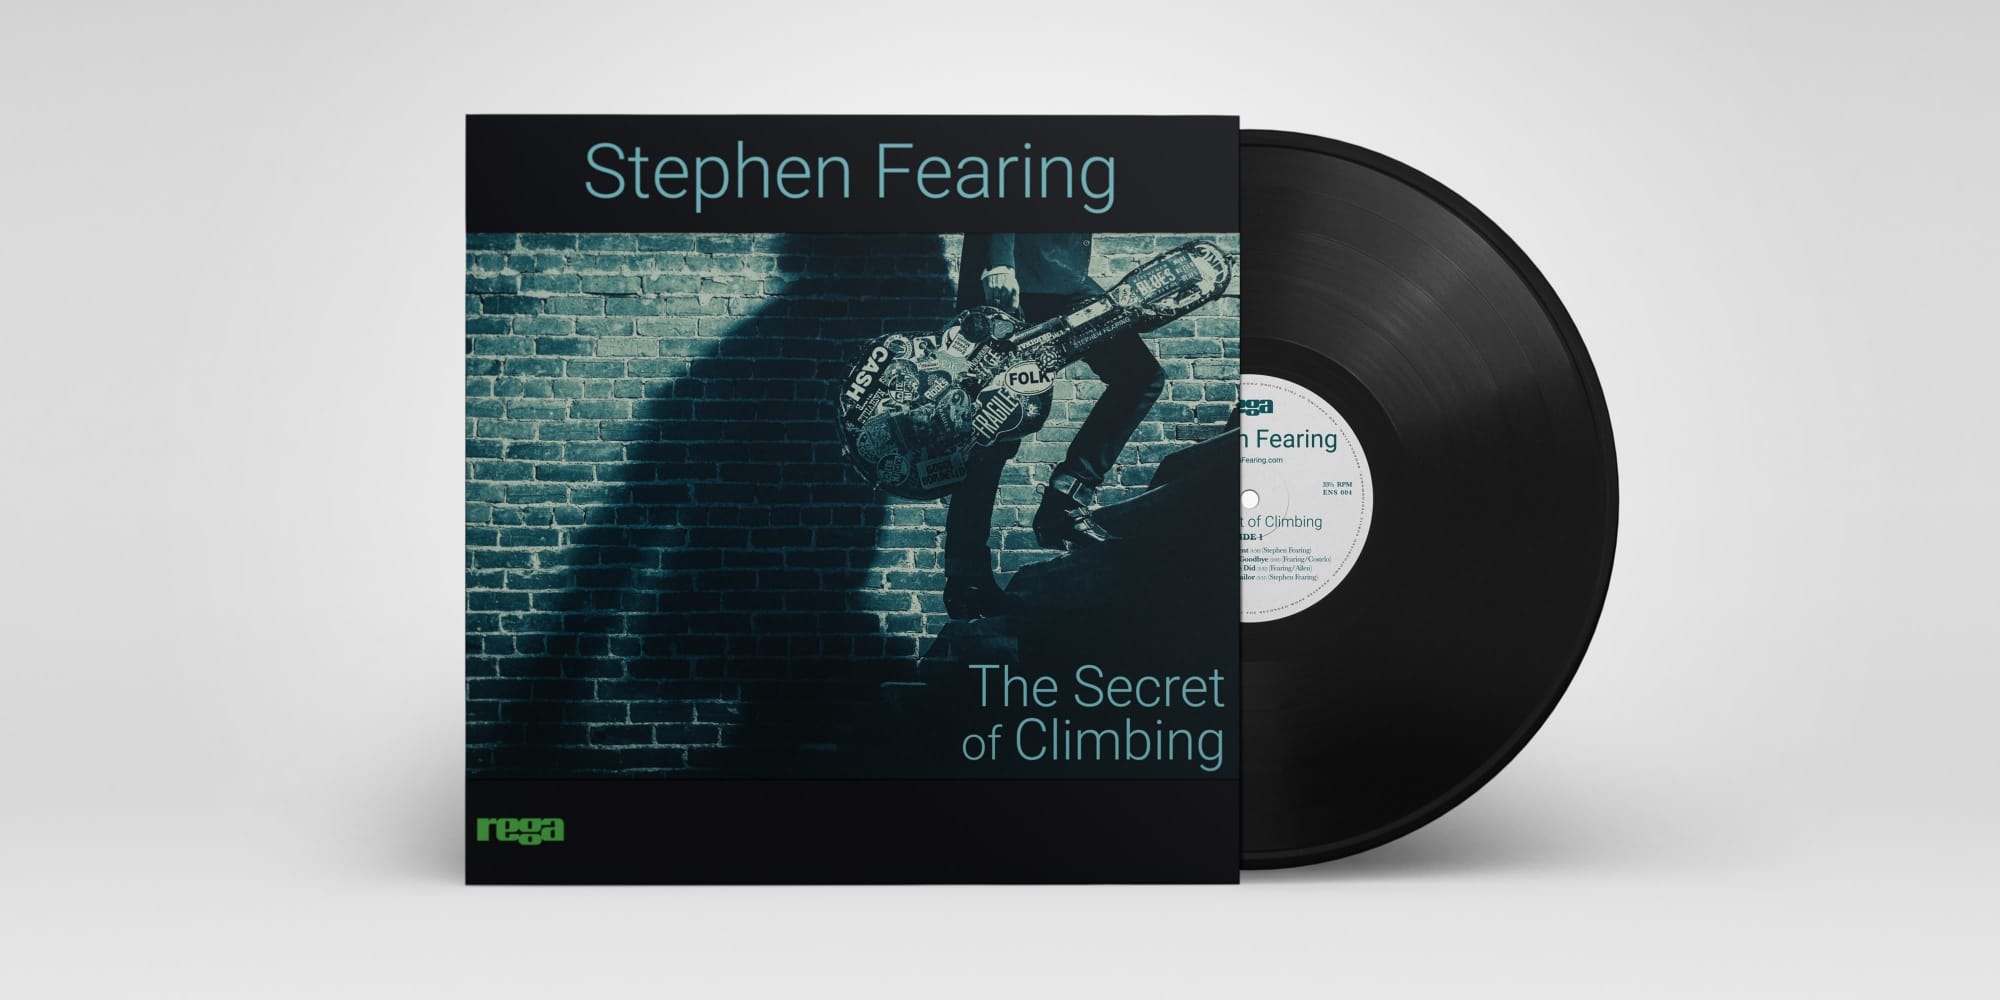 The Secret of Climbing by Stephen Fearing